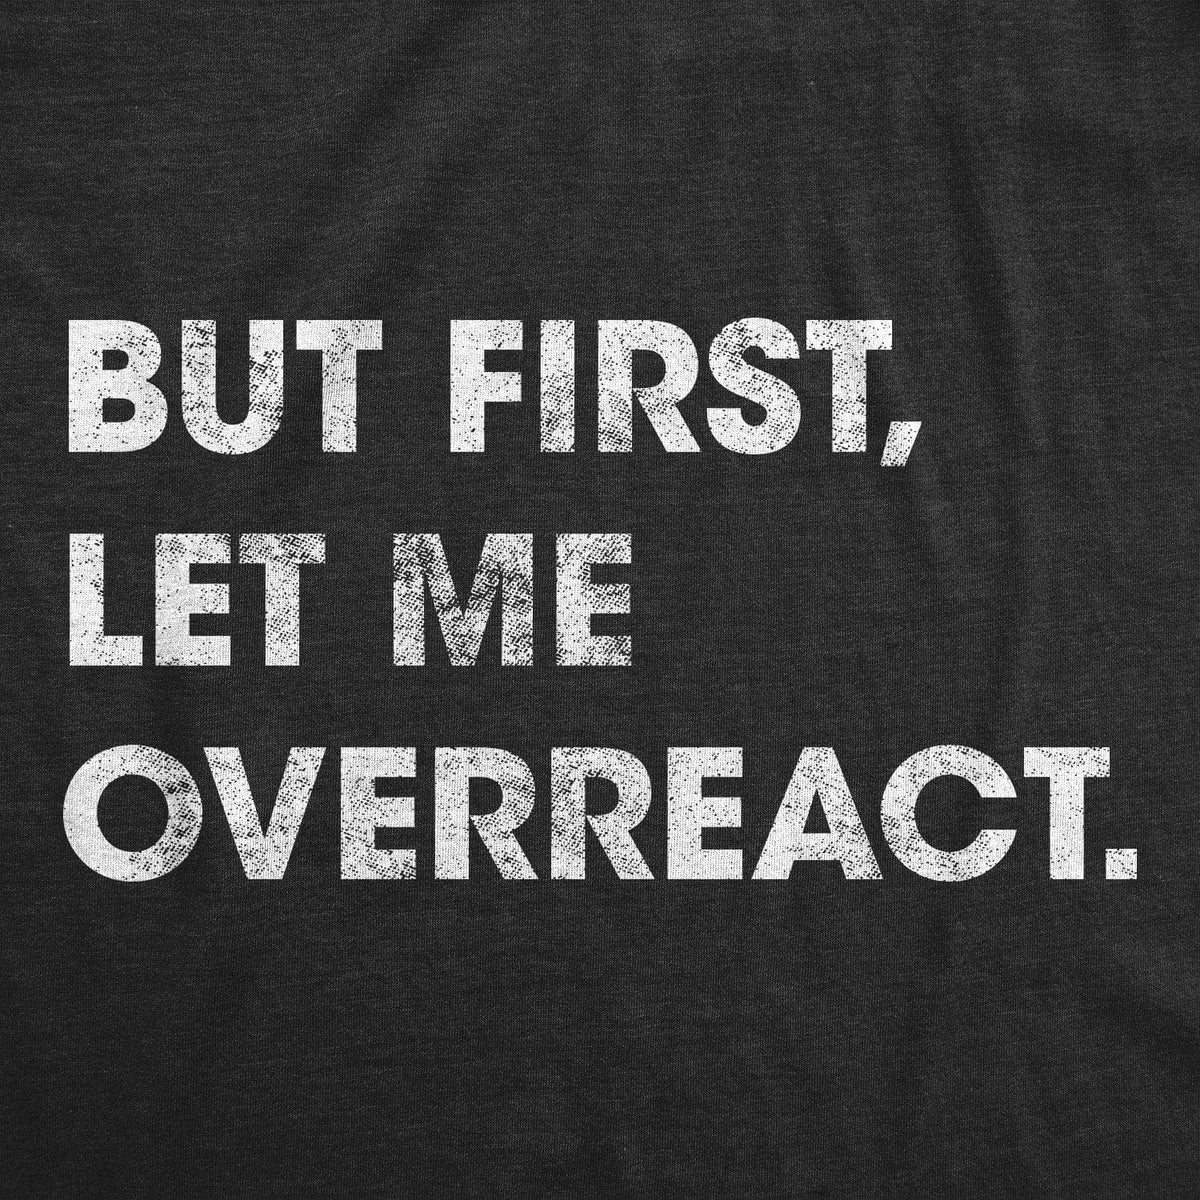 But First Let Me Overreact Women&#39;s Tshirt - Crazy Dog T-Shirts